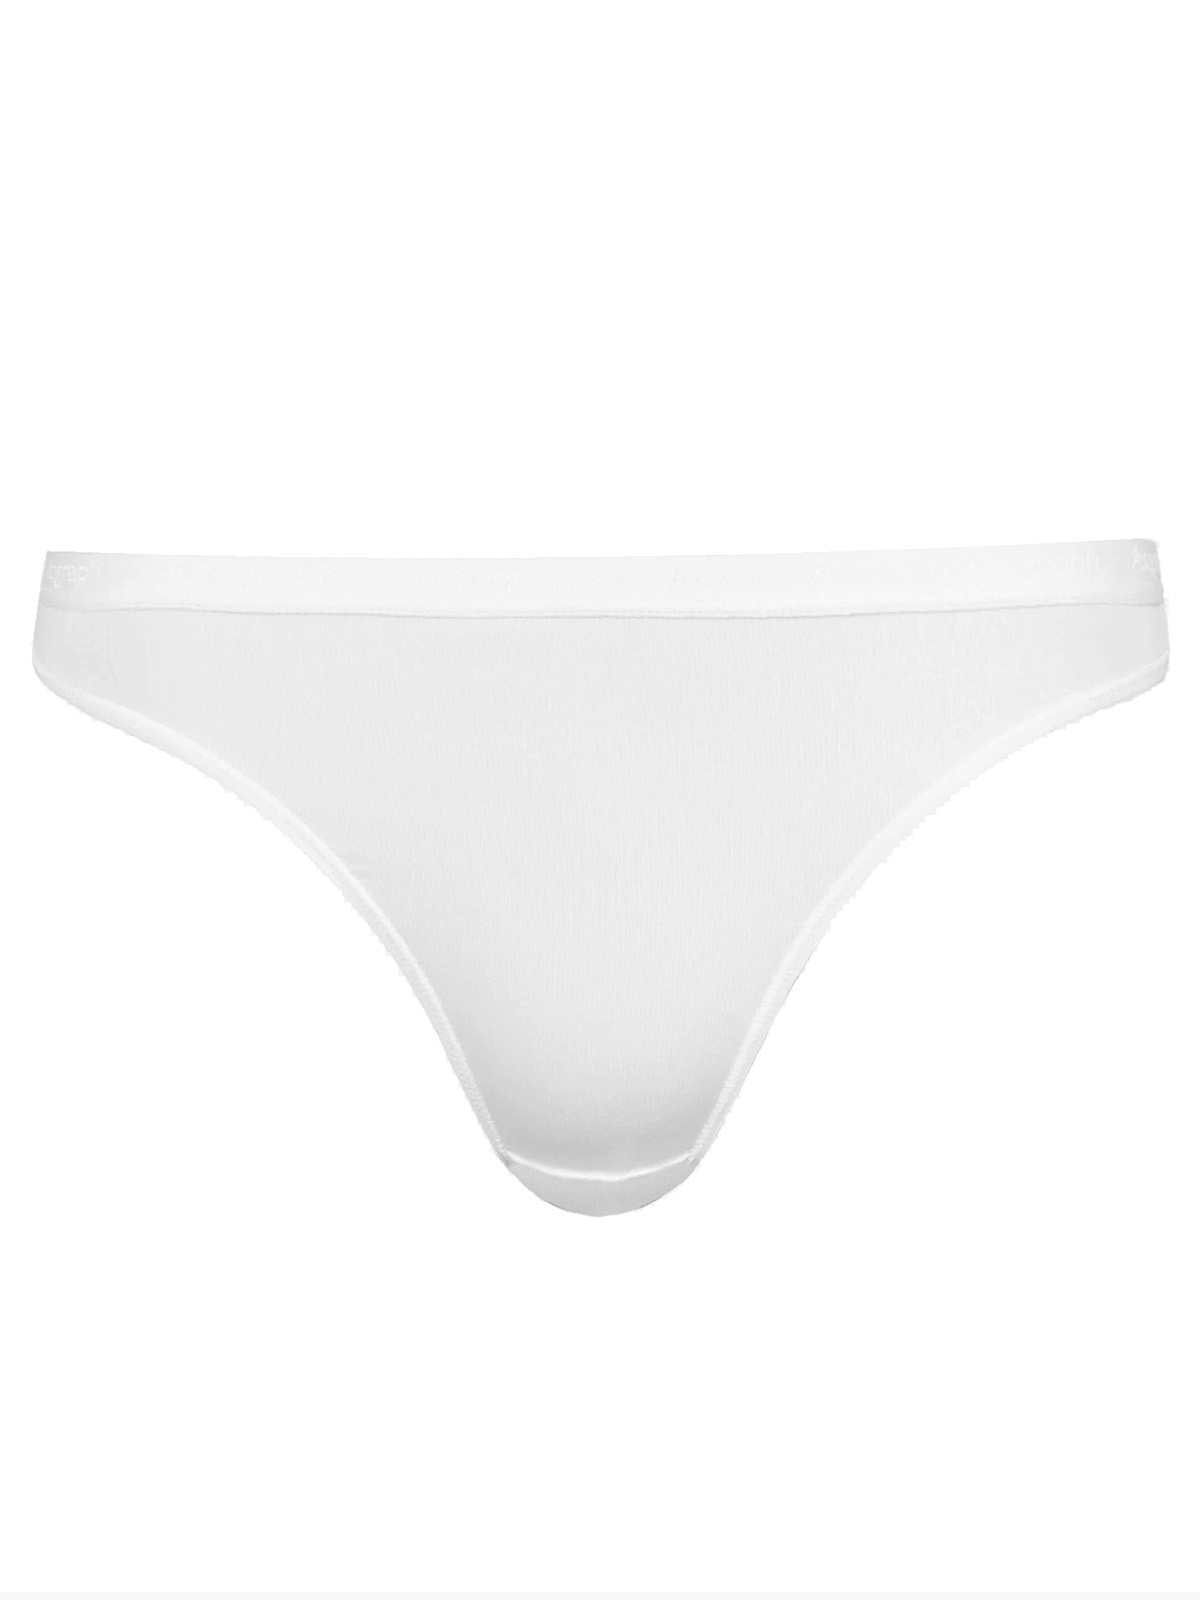 Marks and Spencer - - M&5 4utograph WHITE No VPL Thong - Size 6 to 18